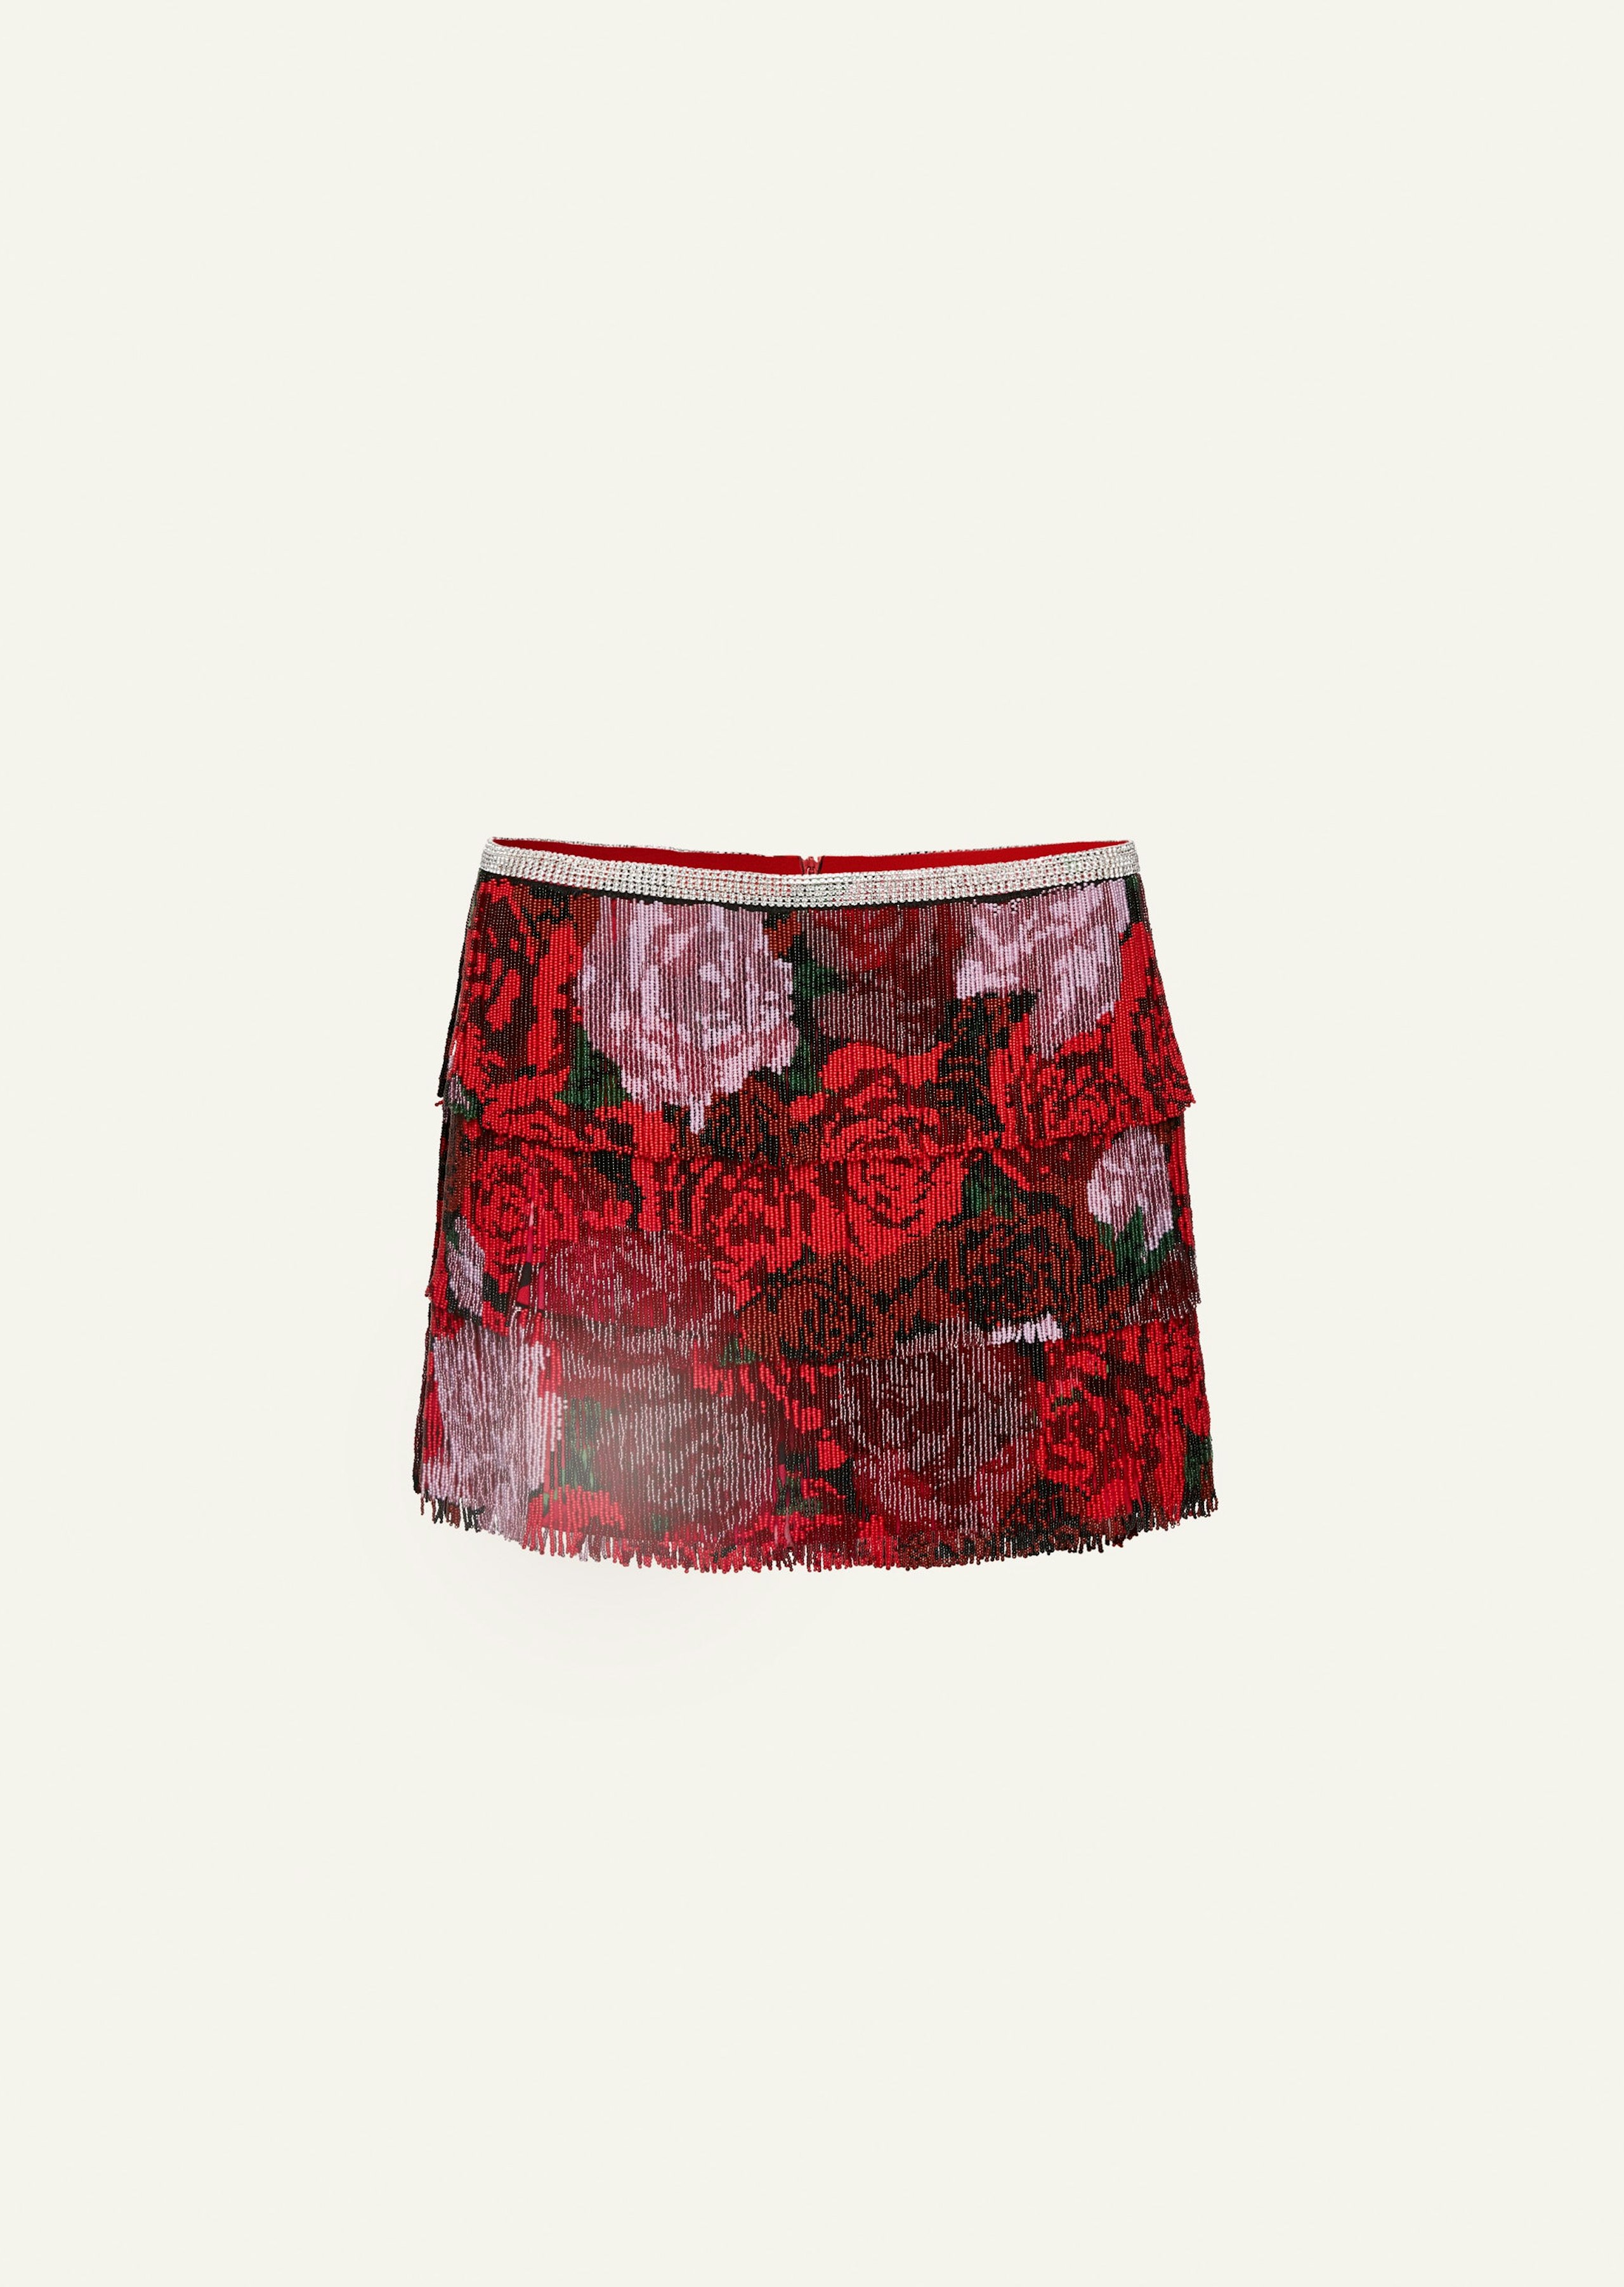 RE22 SKIRT 03 RED PRINT